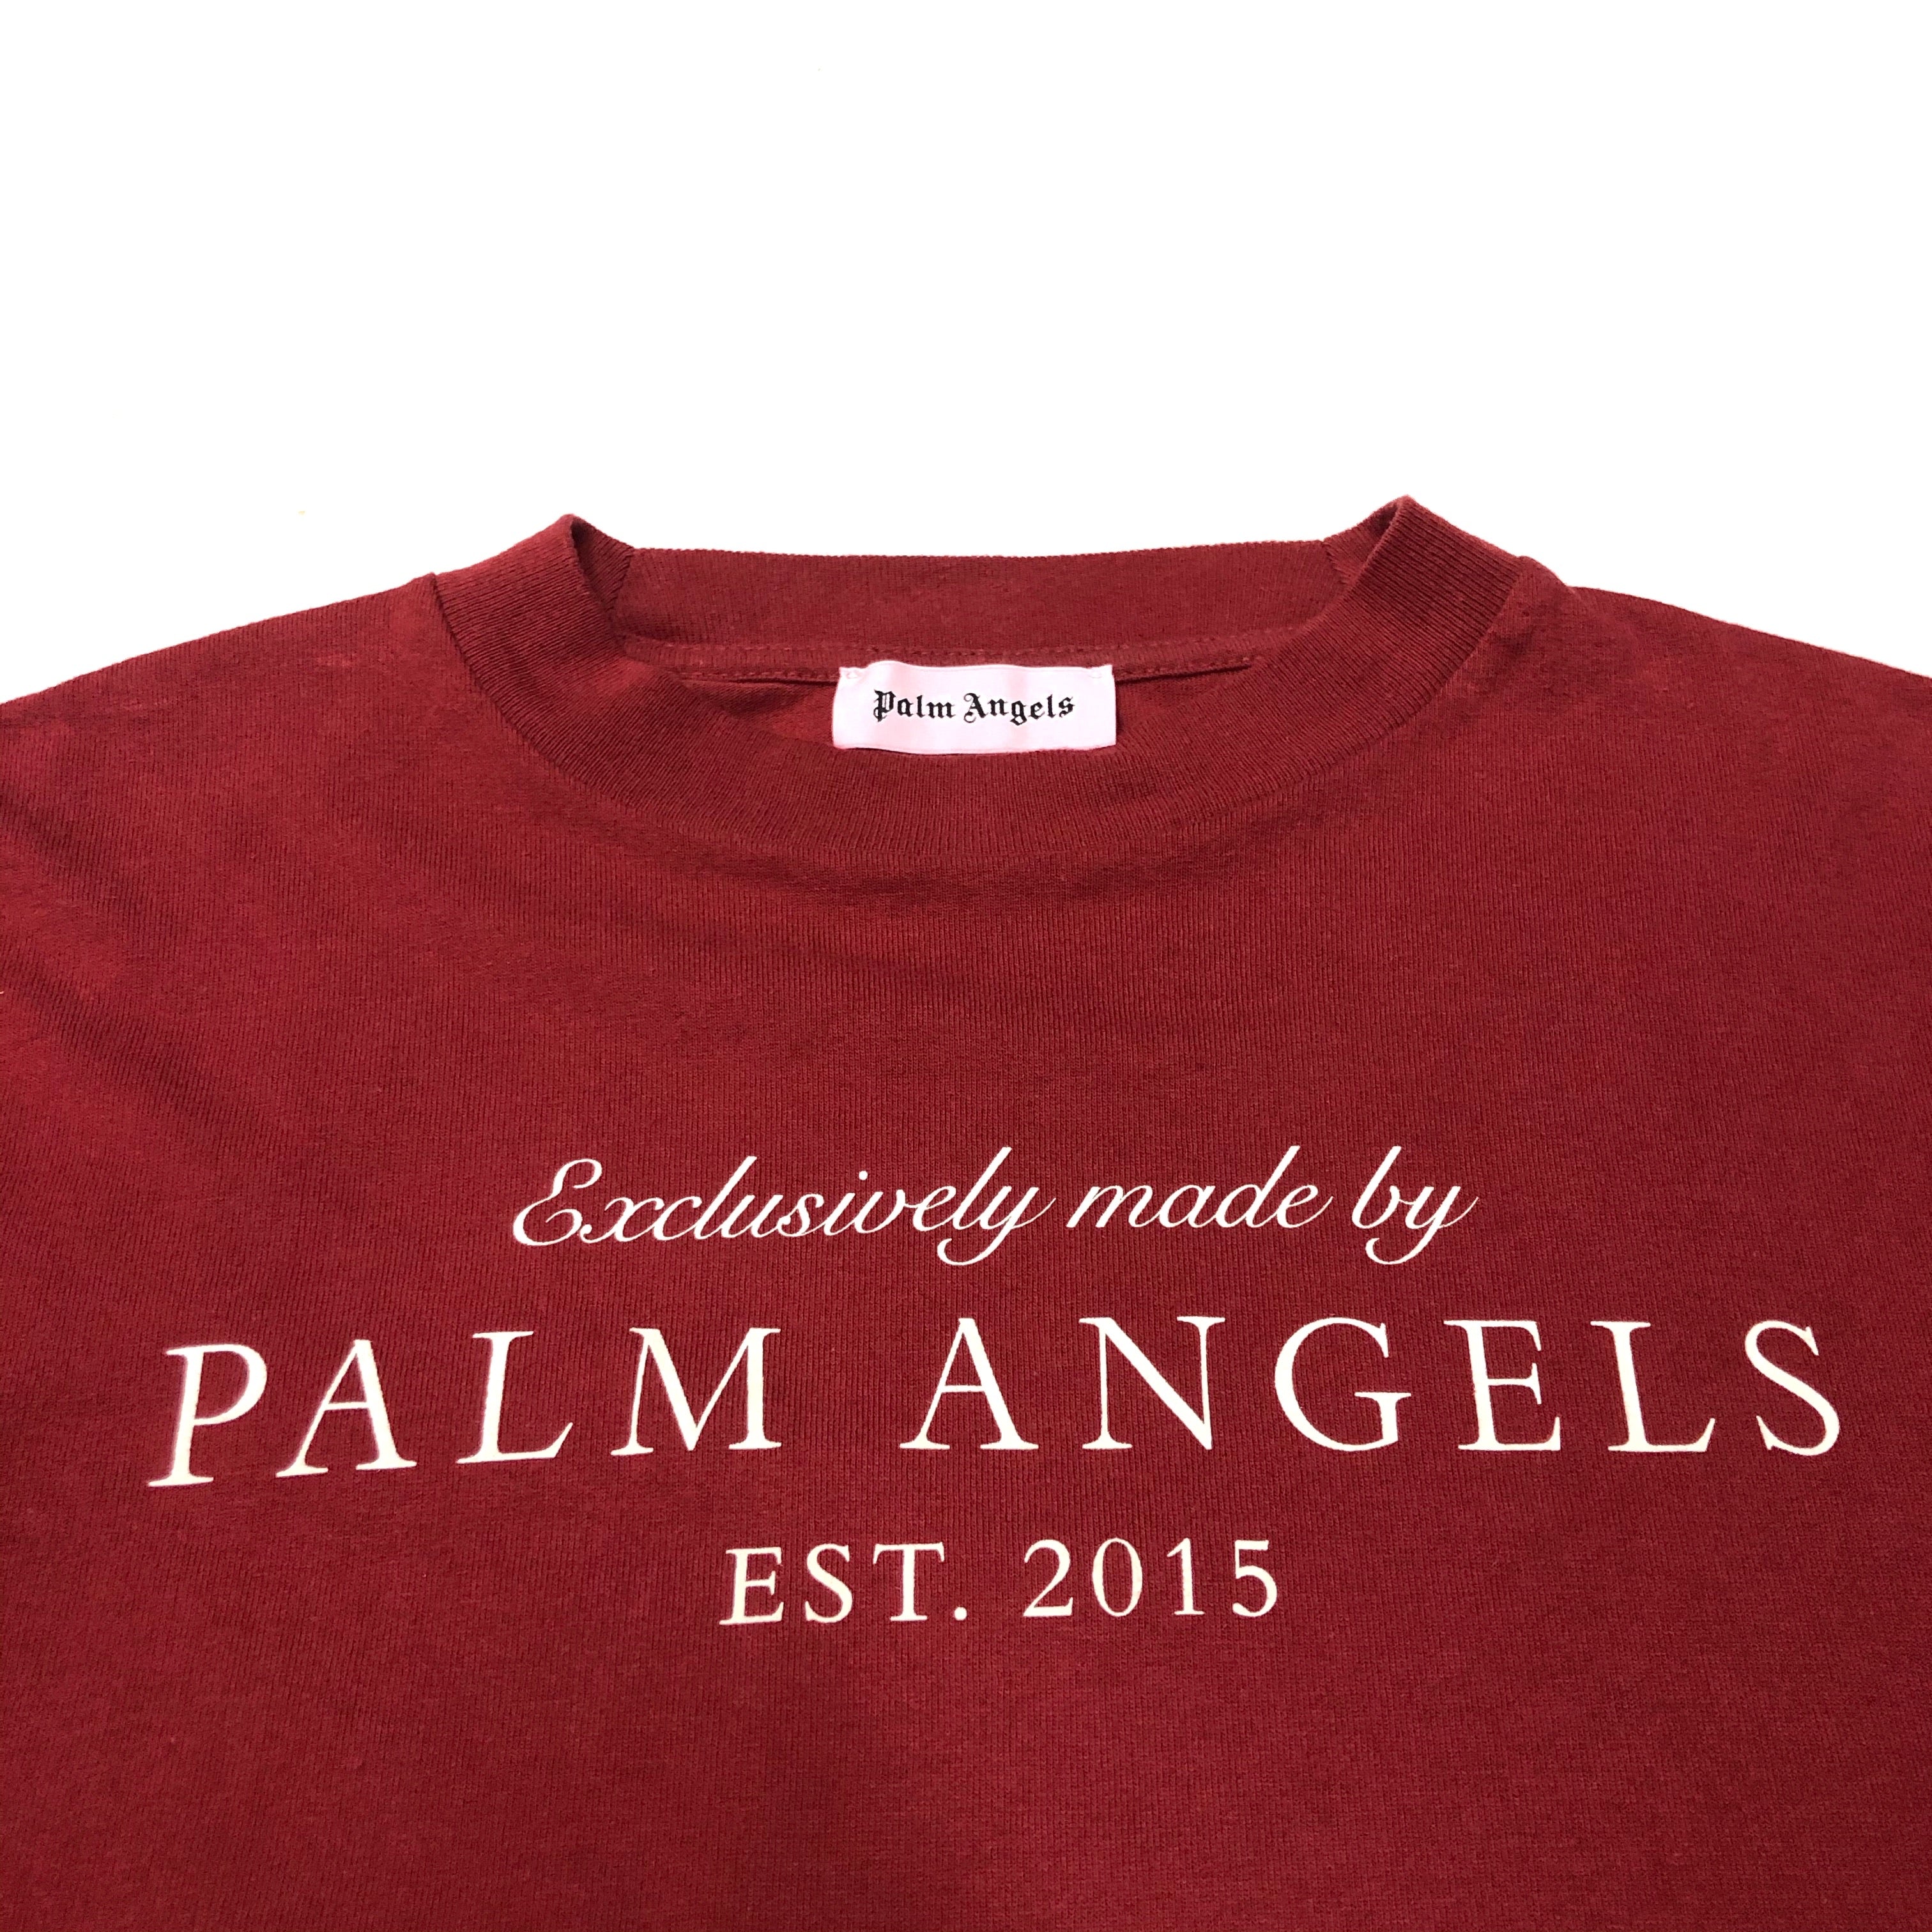 Palm Angels EST 2015 Spell Out Short Sleeved T Shirt with Back Print Initials